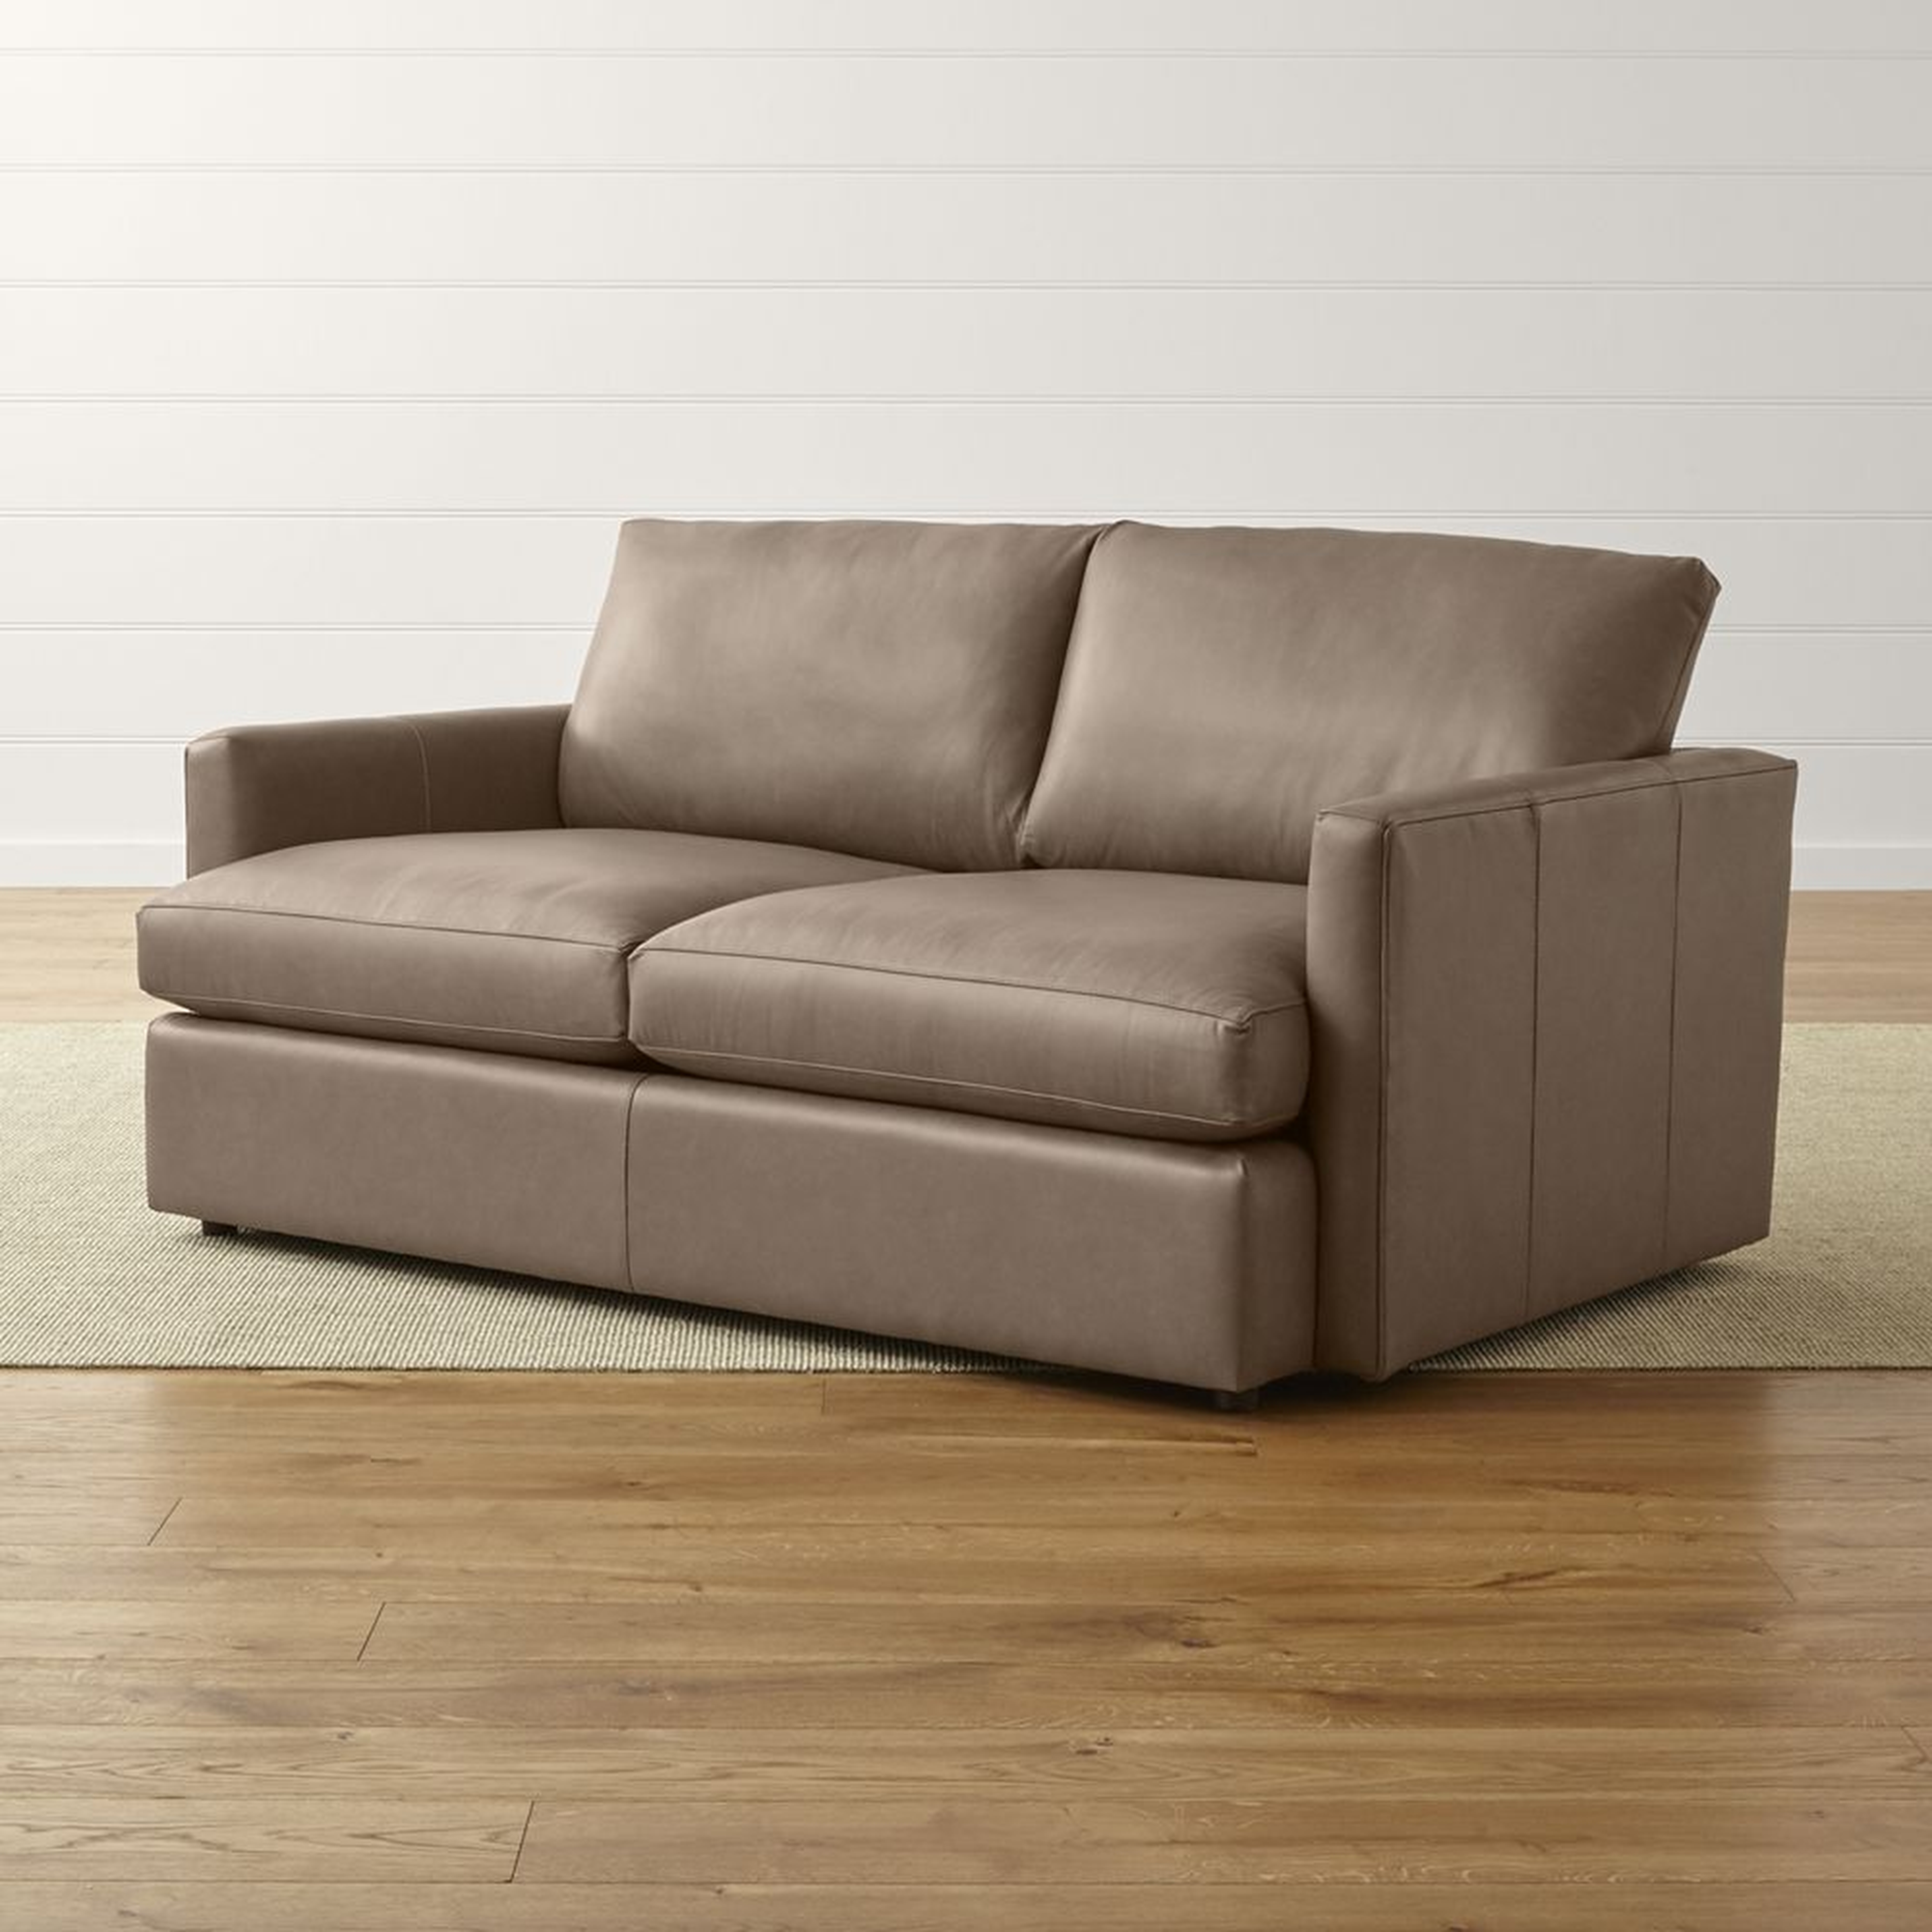 Lounge Leather Apartment Sofa - Crate and Barrel